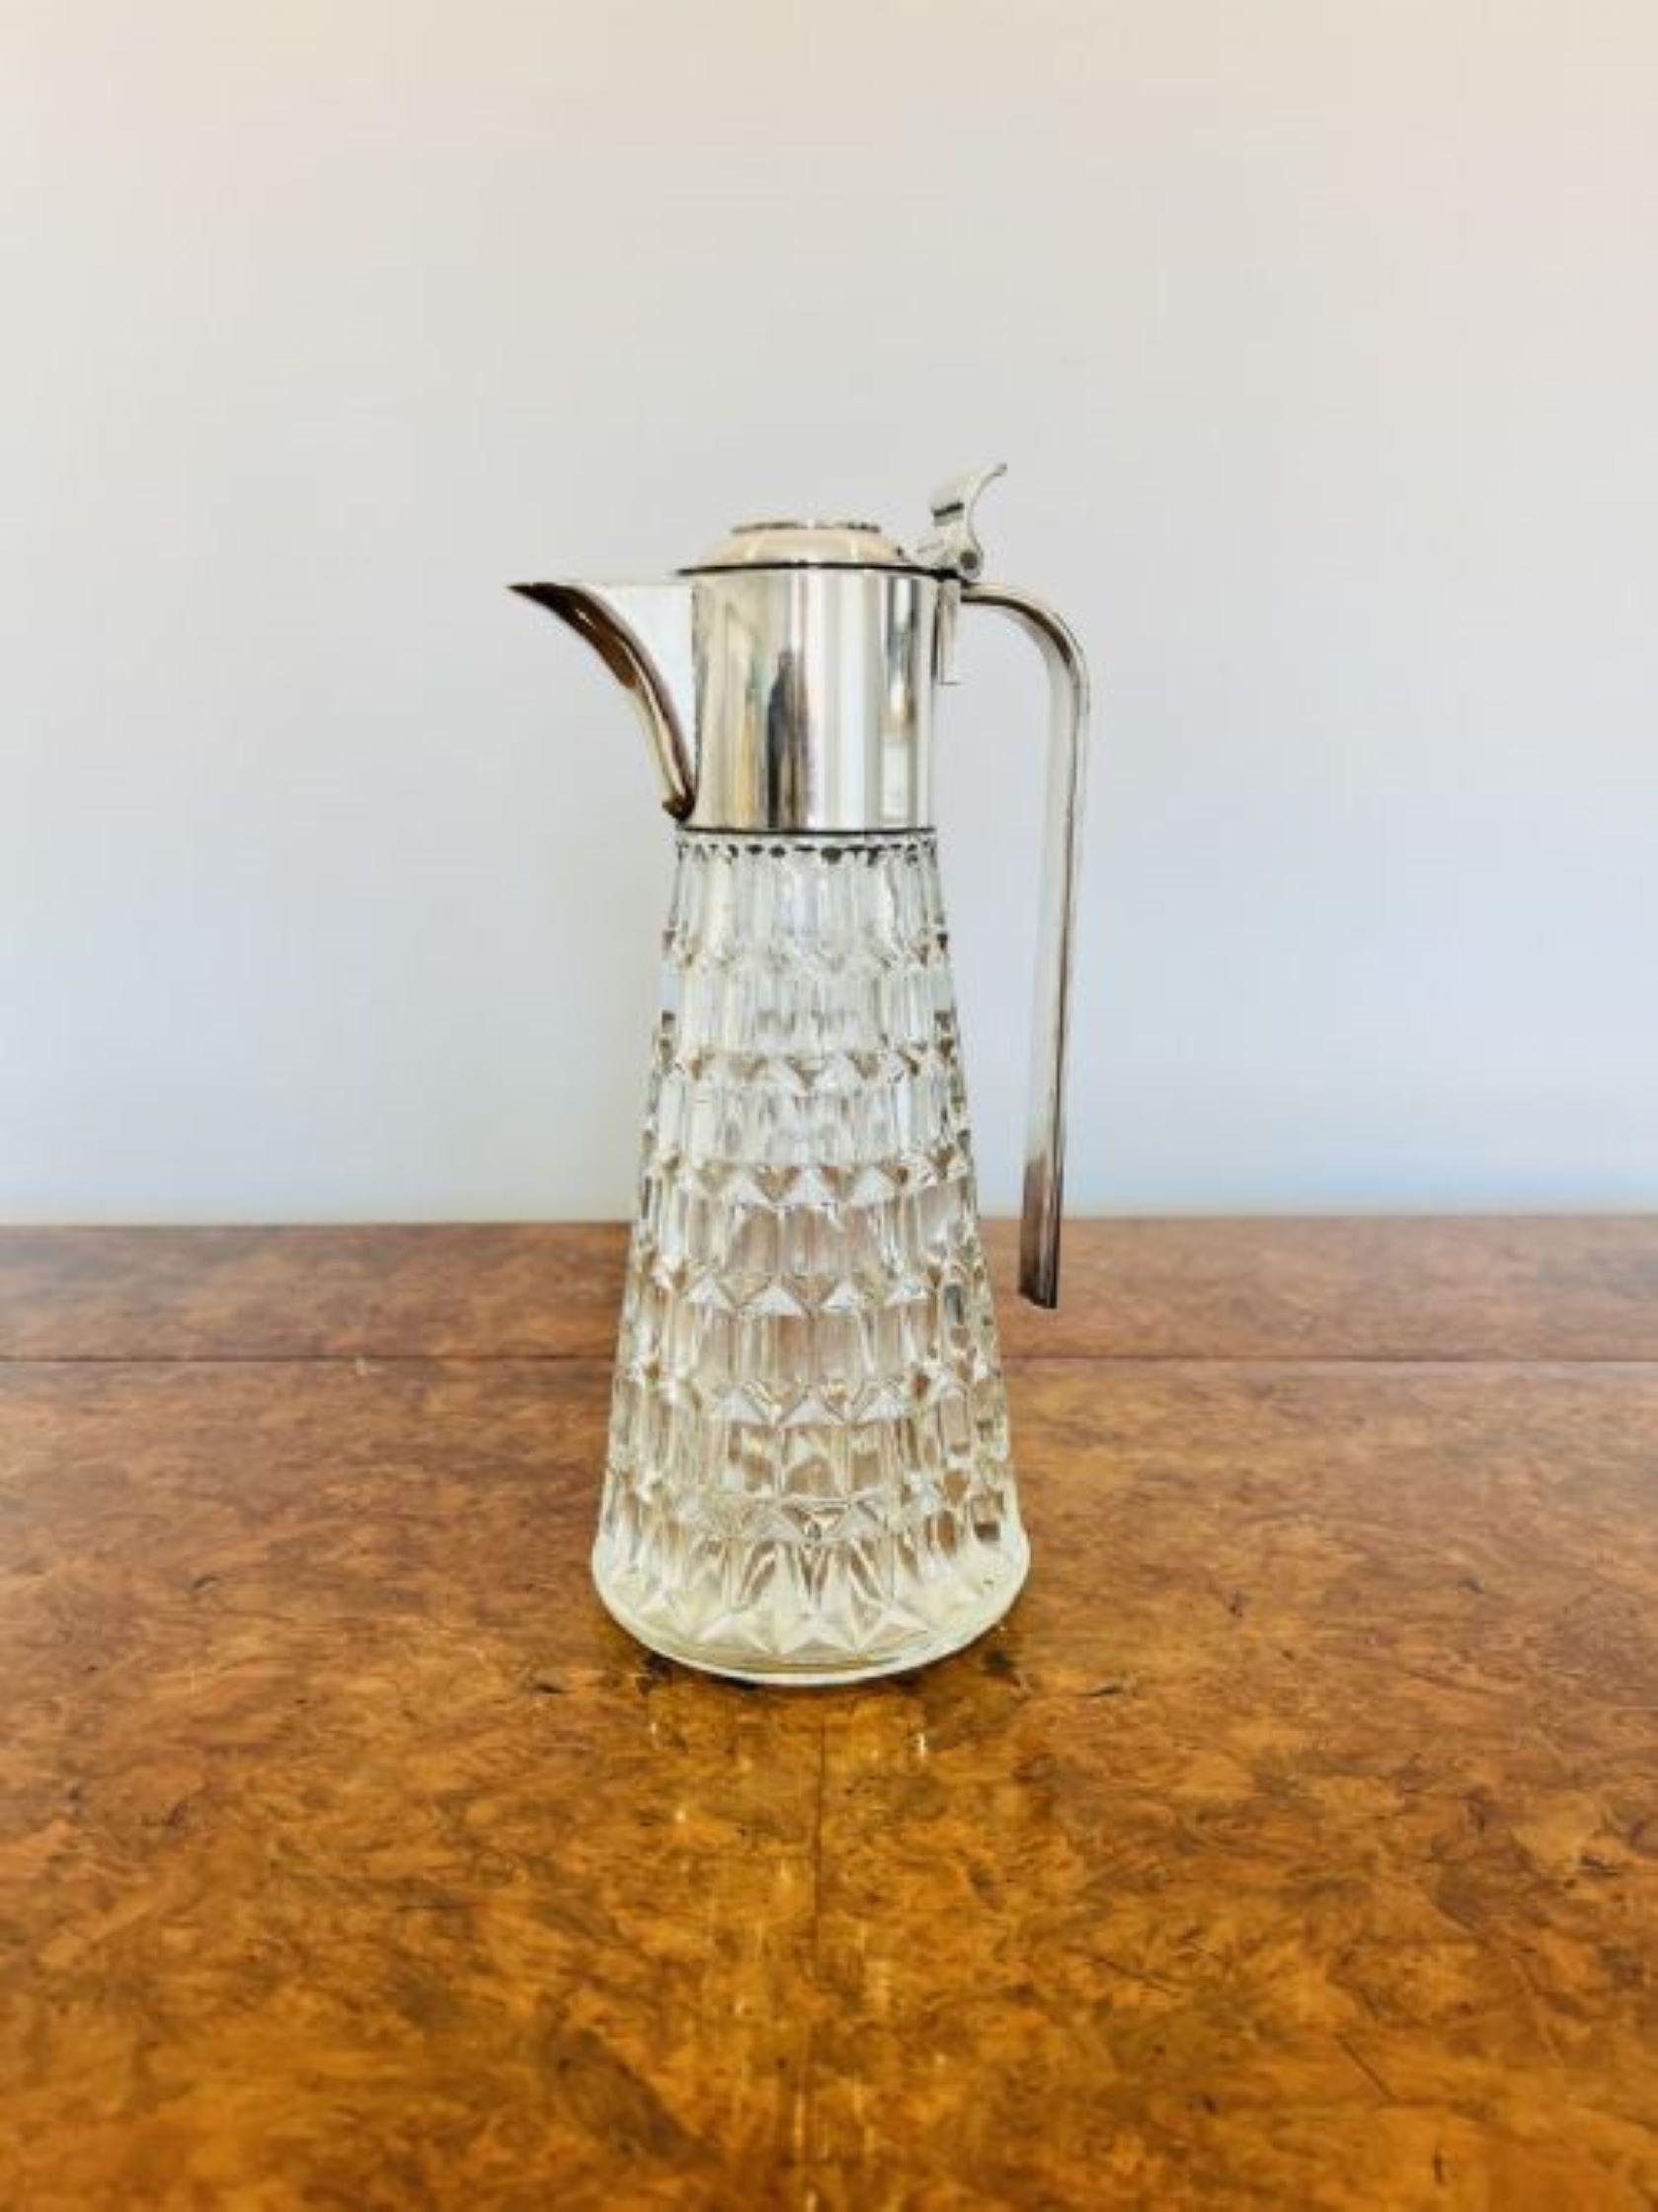 Antique Edwardian quality cut glass and silver plated claret jug having a quality cut glass claret jug with a silver plated handle and lid 